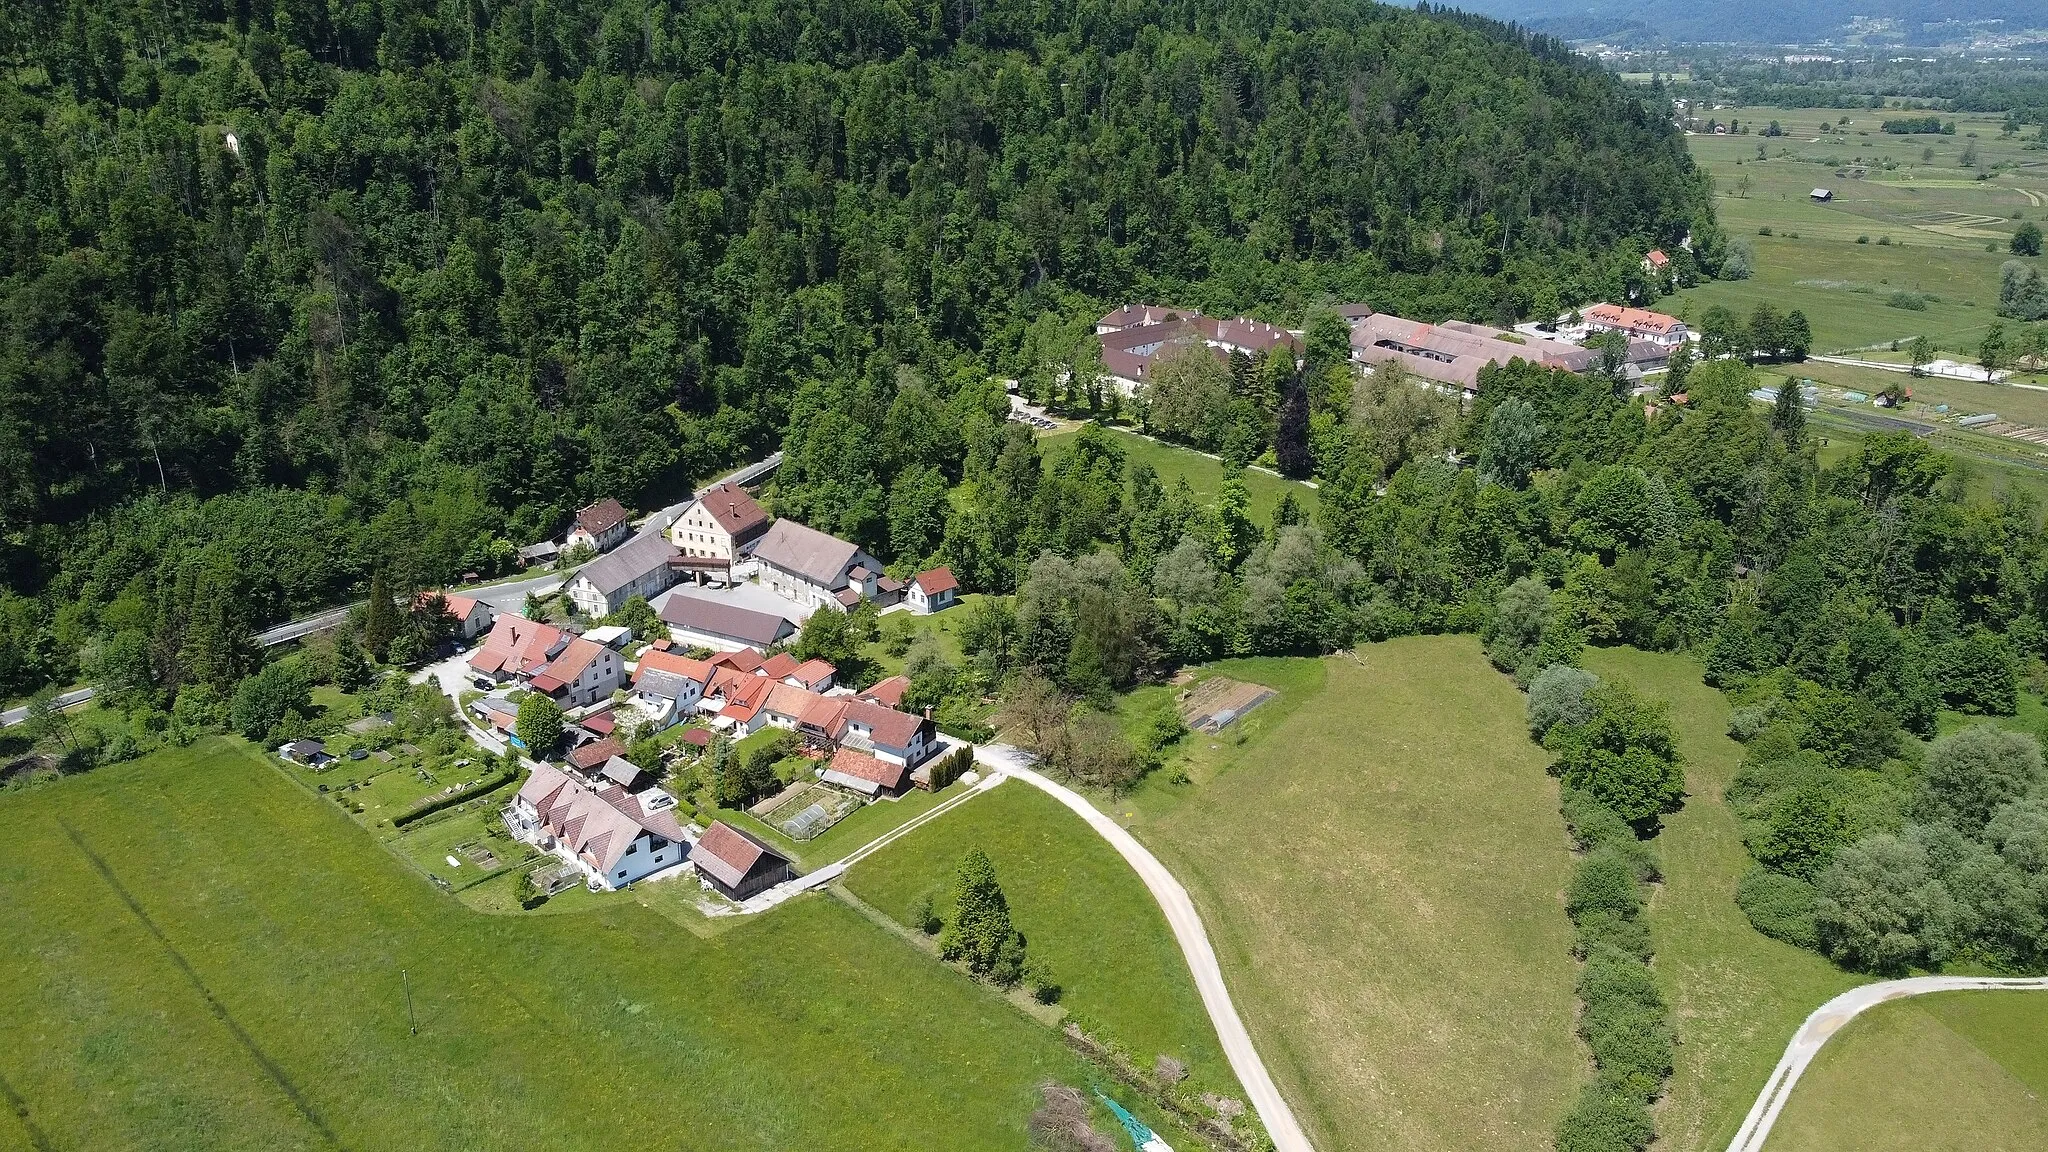 Photo showing: The westernmost part of Dol pri Borovnici (left) and the monastery complex in adjacent Bistra (right), Central Slovenia.